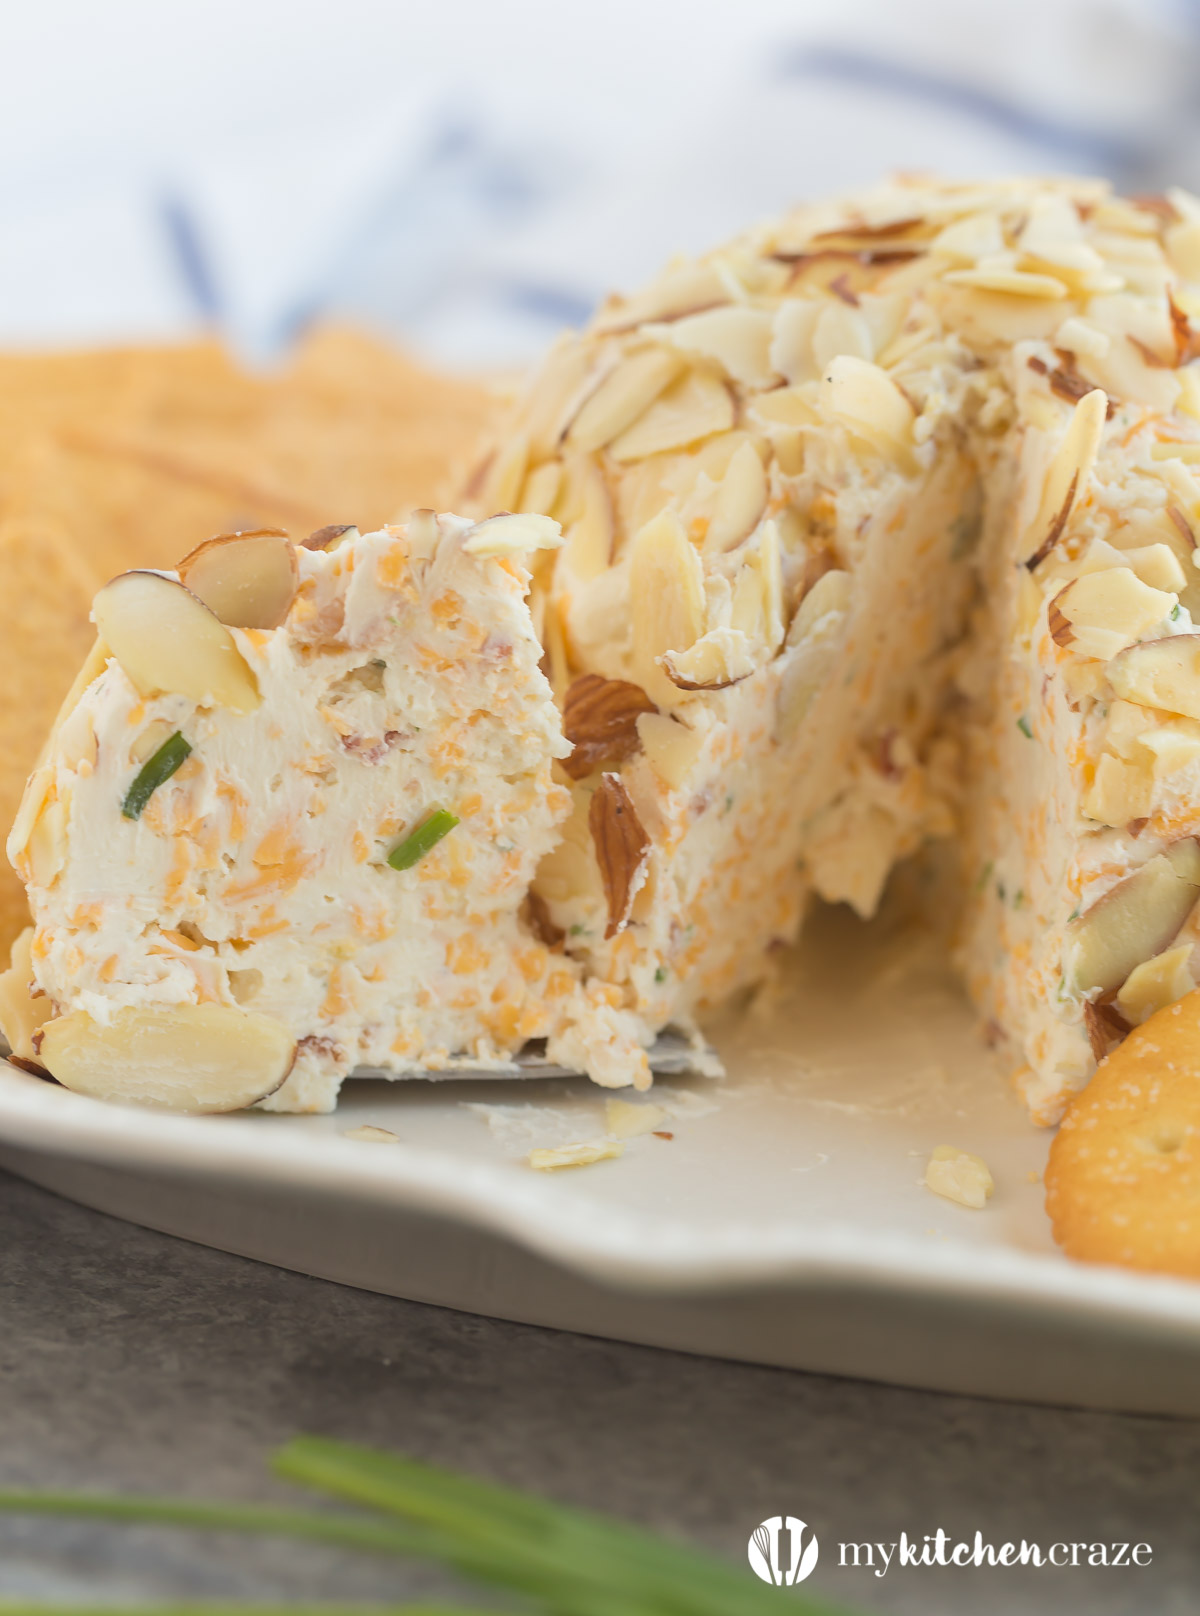 Easy Cheese Ball ~ Need a quick appetizer for a upcoming party or a special event? Then you need to make this Easy Cheese Ball. Perfect with crackers and meats. This appetizer will be the hit of the party!